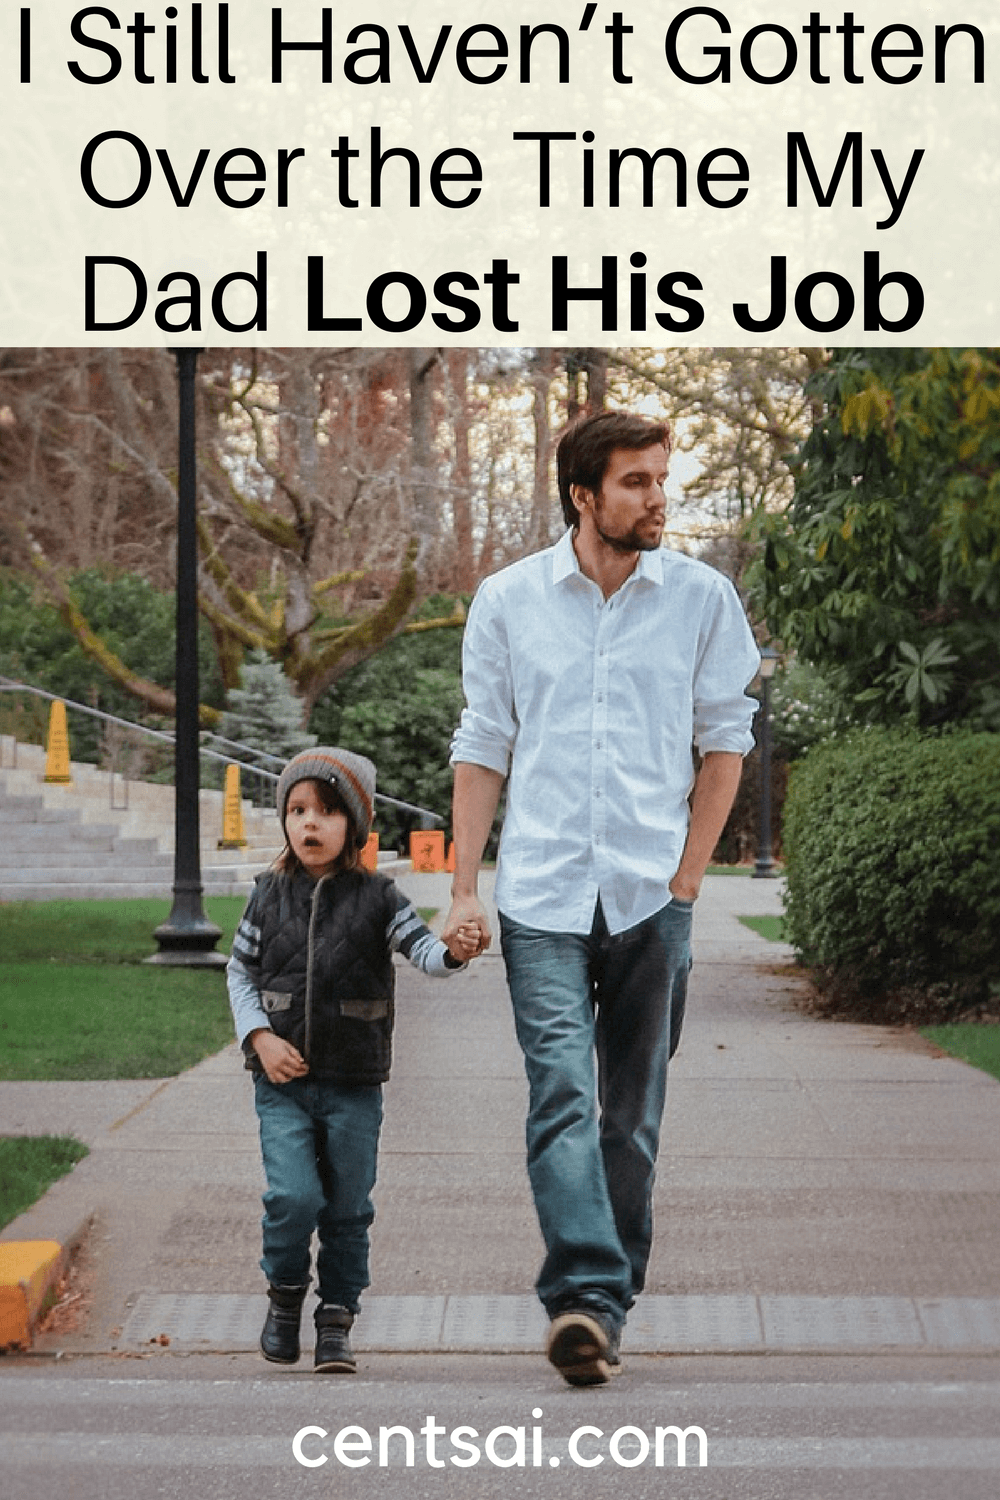 I Still Haven’t Gotten Over the Time My Dad Lost His Job.